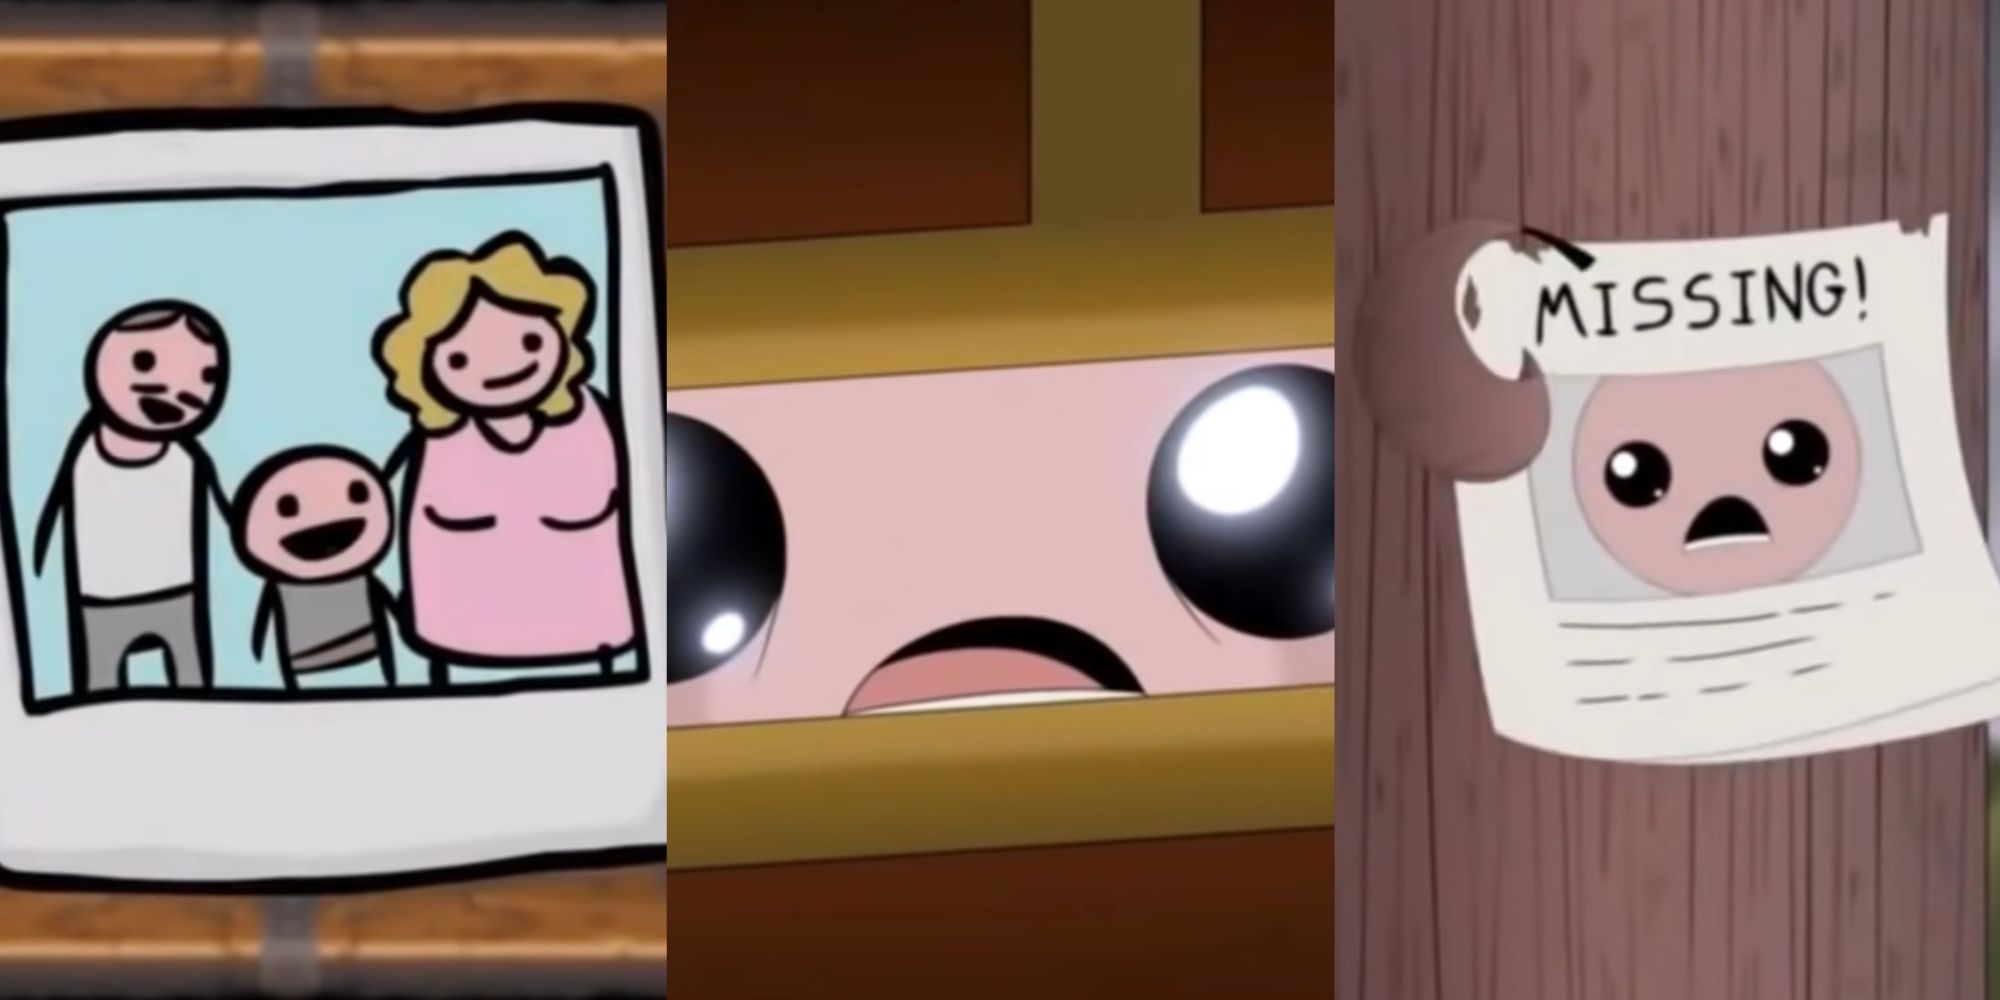 The Binding of Isaac Ending - A polaroid of the family happy together, Isaac looking in the chest, and the missing poster